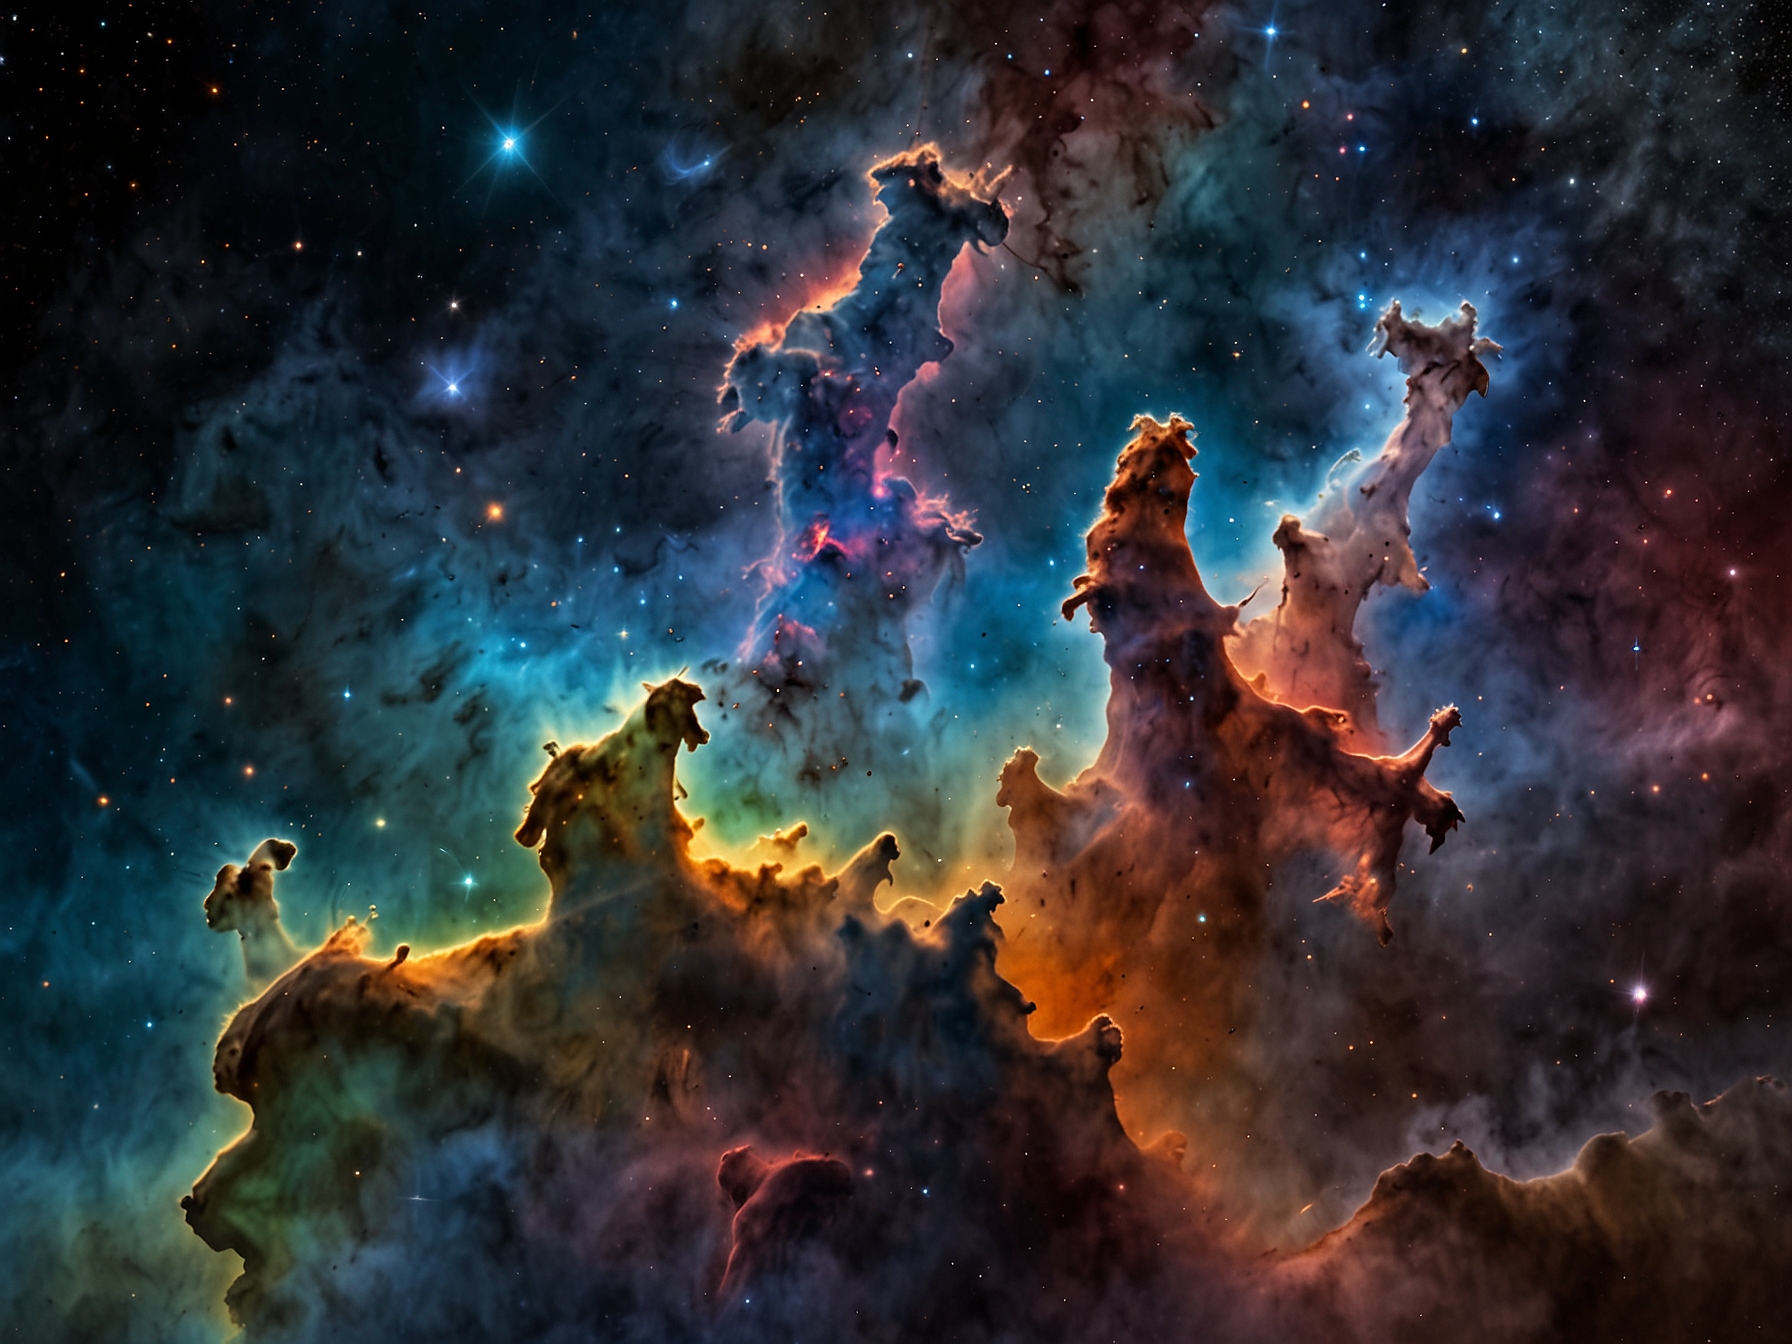 Visualization of star formation within the 'Pillars of Creation' using multi-wavelength data, depicting the interplay of gas, dust, and emerging stars in the renowned star-forming region.